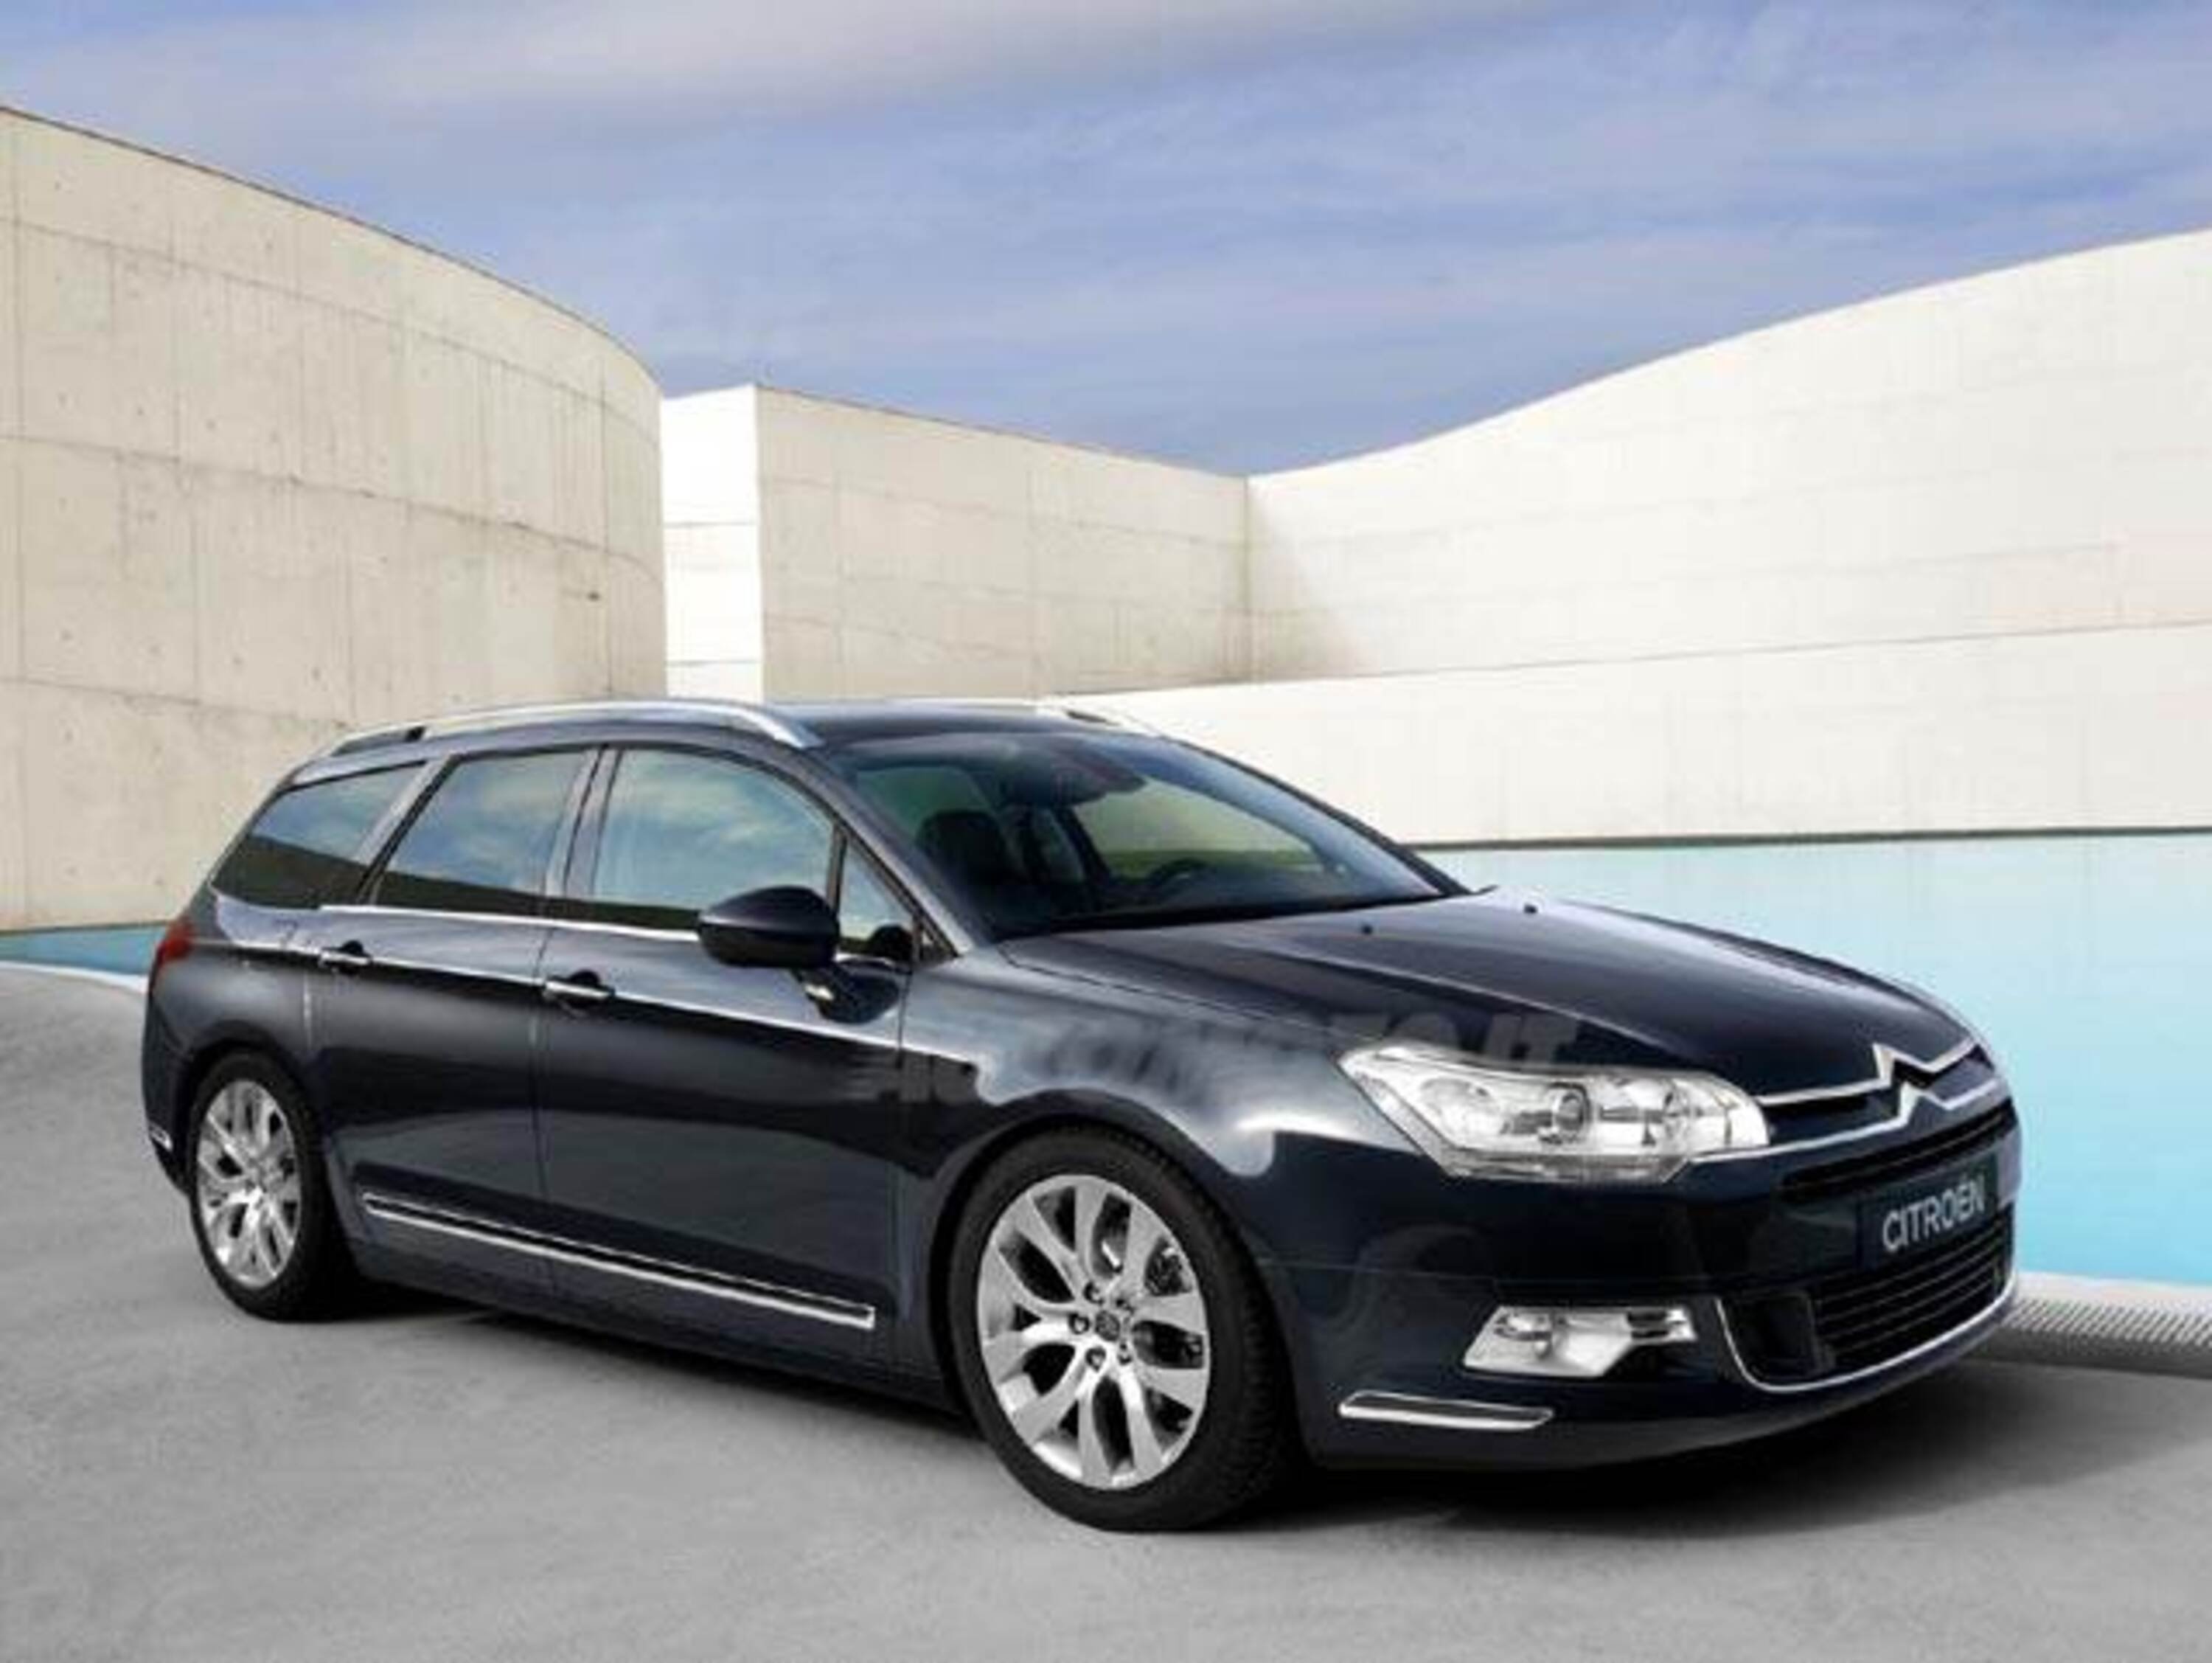 Citroen C5 Station Wagon 2.0 HDi 138 aut. Exclusive Style